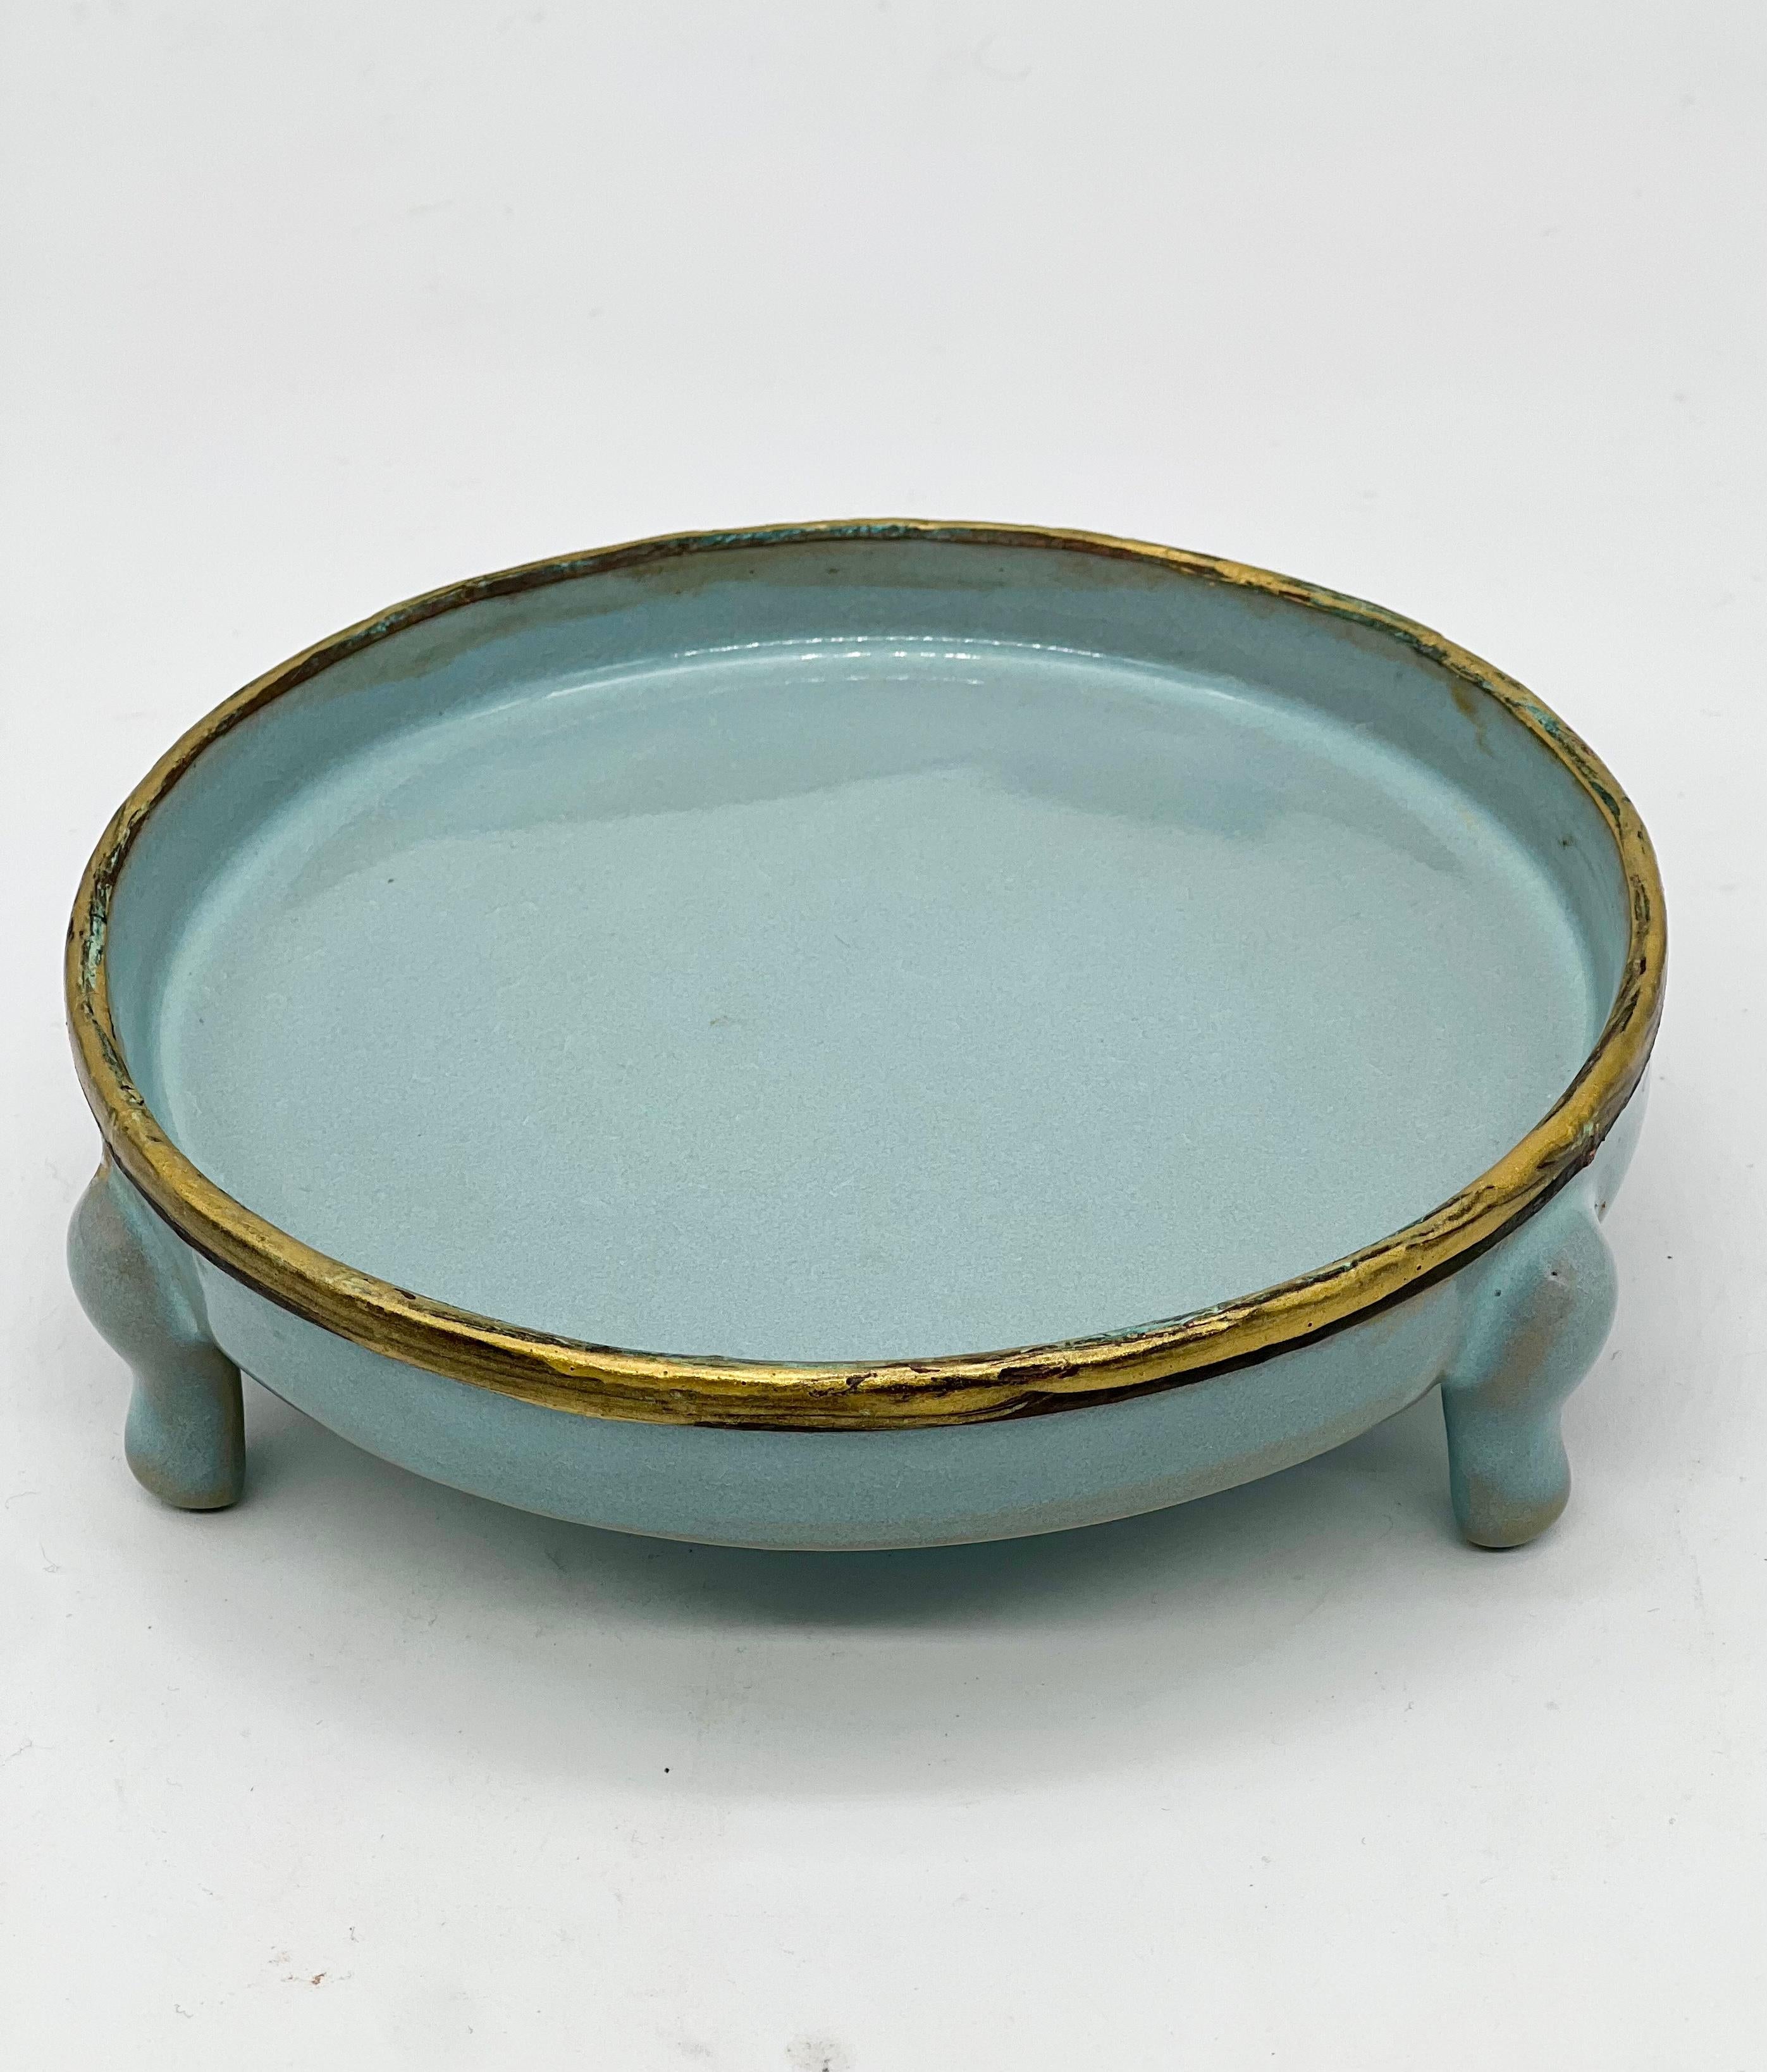 Chinese A FINE 19th C CHINESE THREE LEGGED RU WARE PORCELAIN WASHER/STAND.Qing Dynasty. For Sale